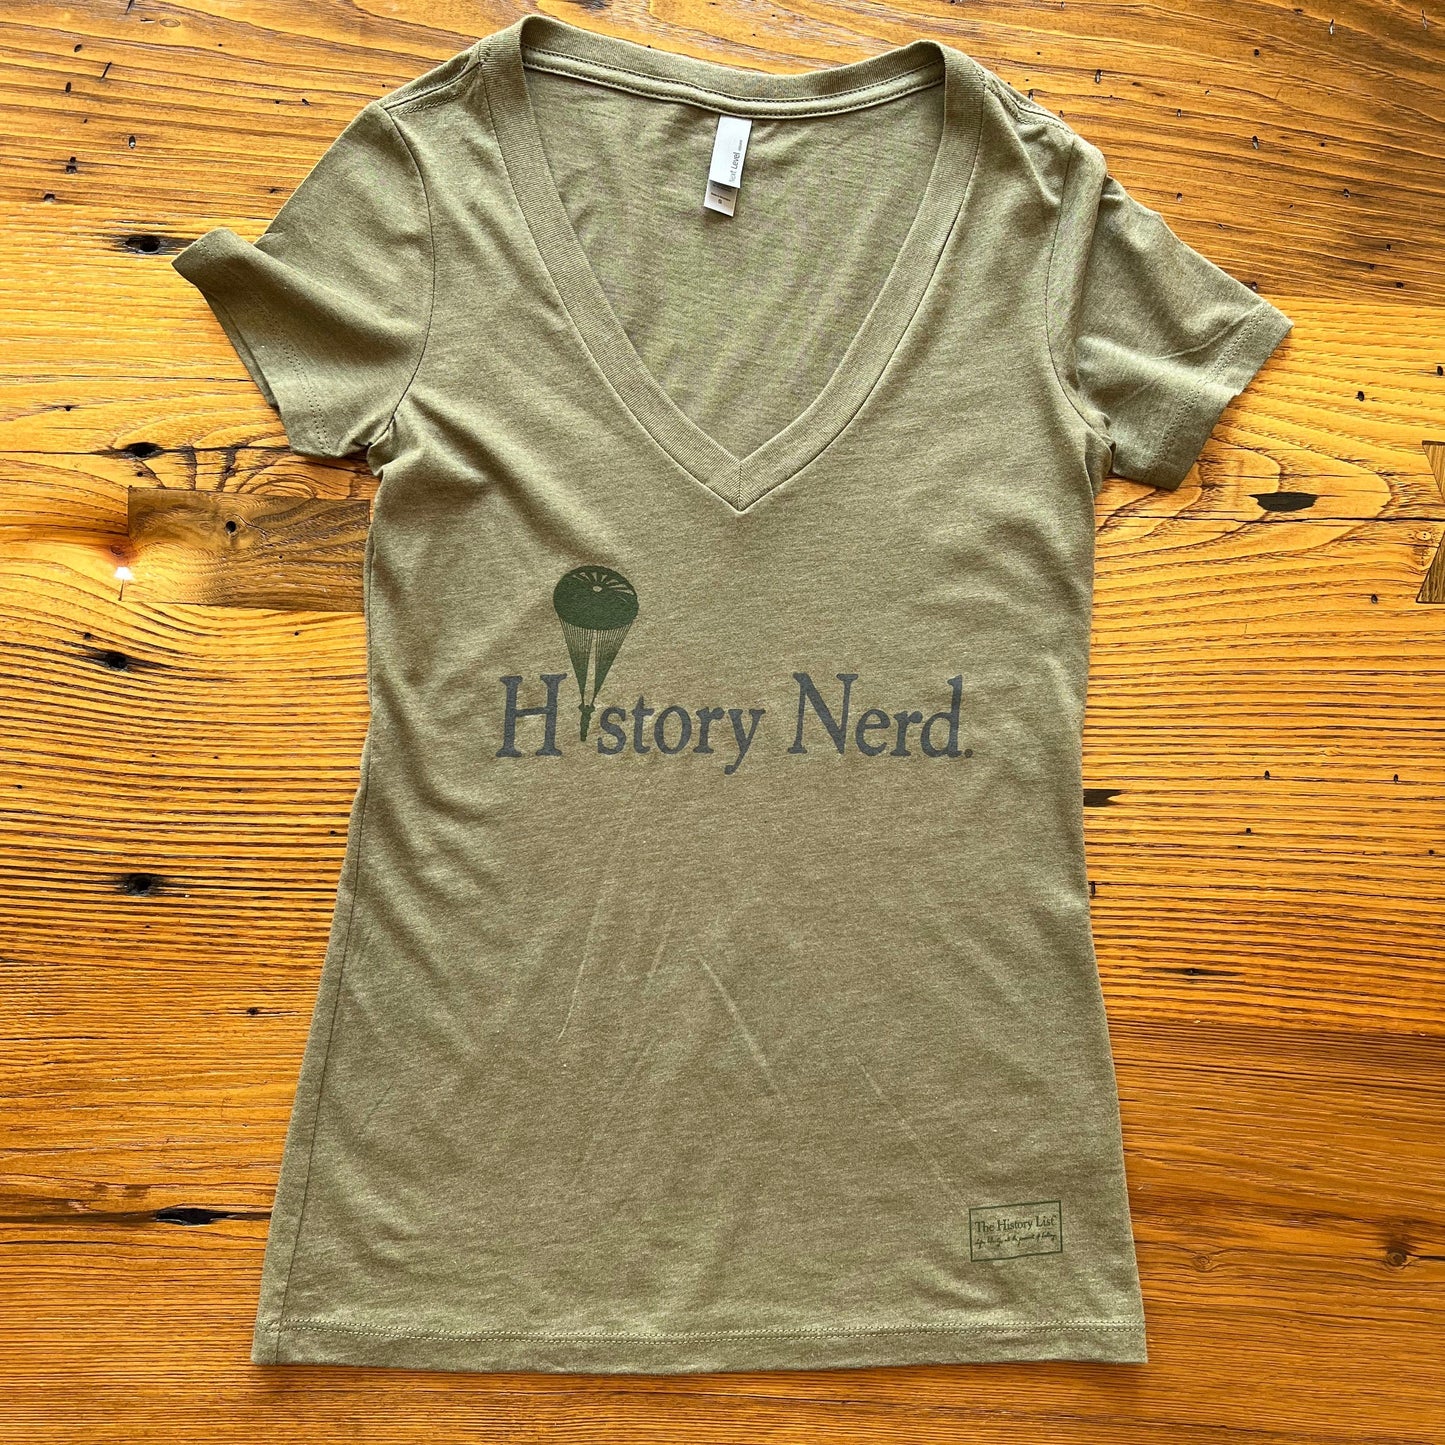 "History Nerd" V-neck shirt with WWII Paratrooper - 75th Anniversary of D-Day from The History List store